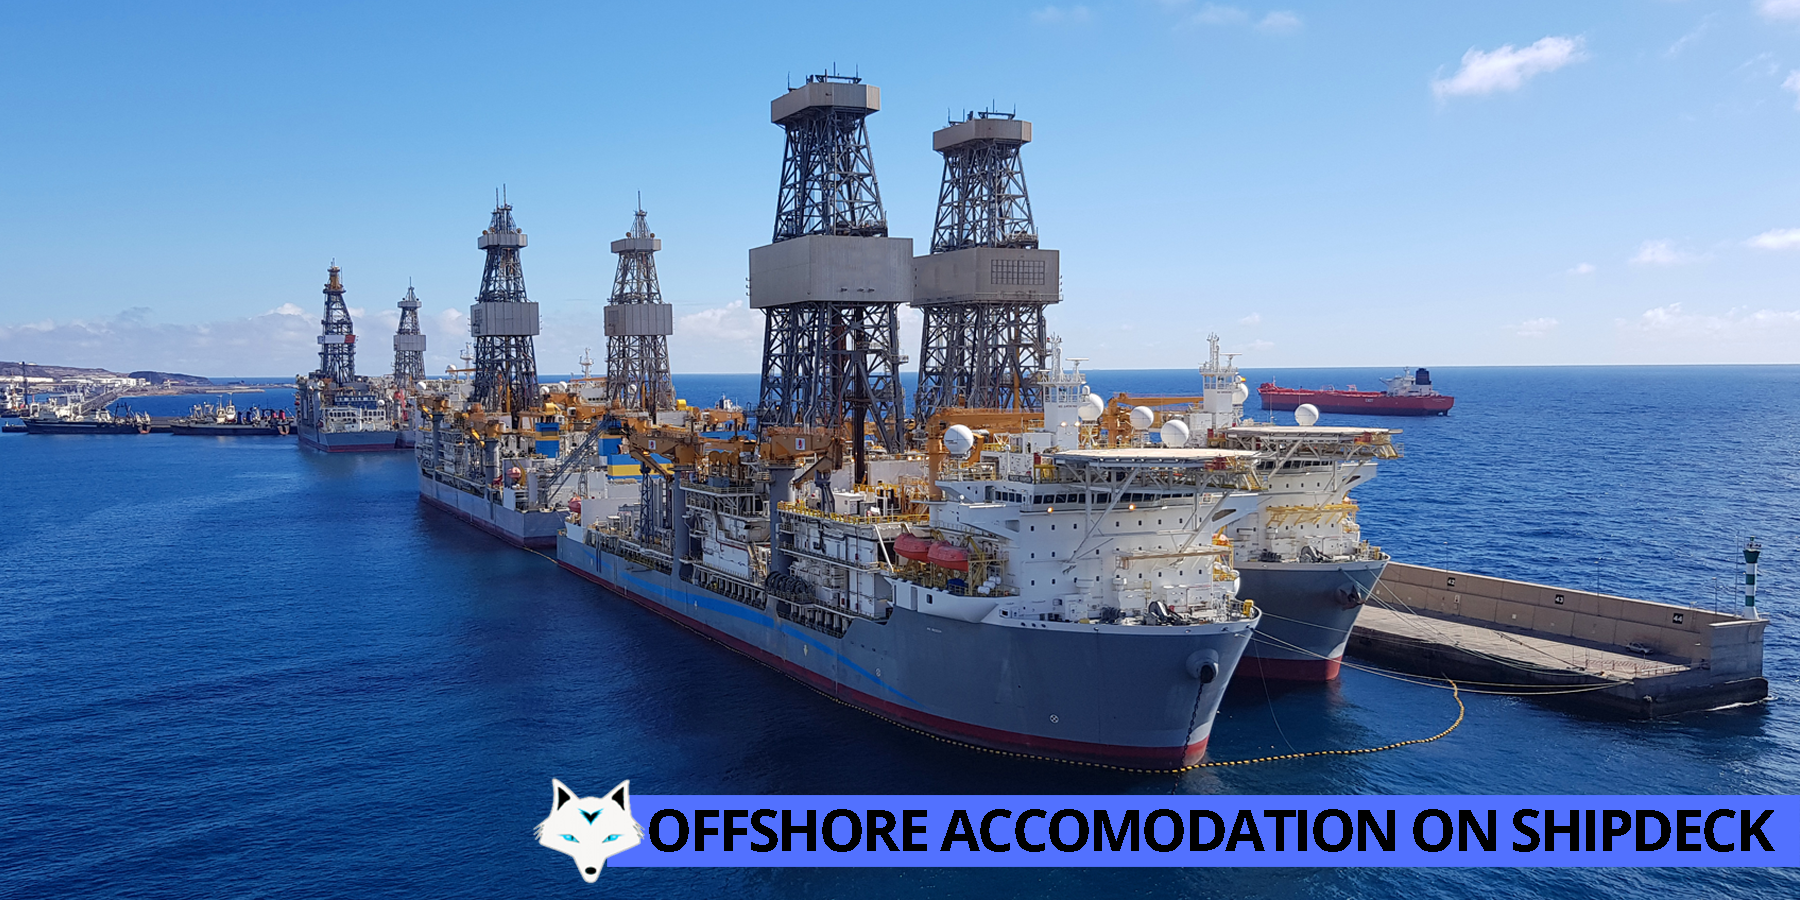 Offshore accommodation on shipdeck